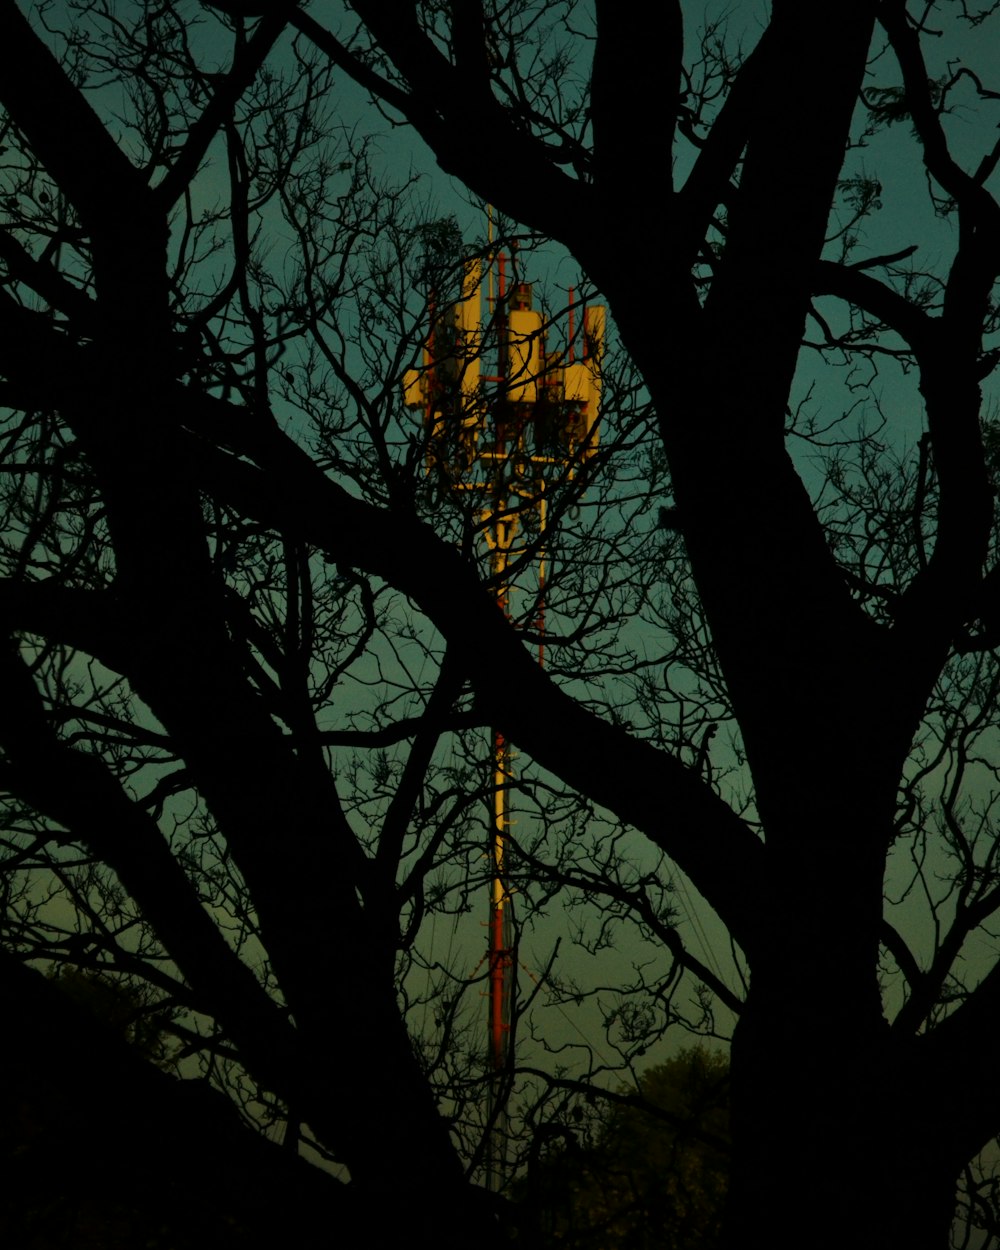 a tree with no leaves and a street light in the background